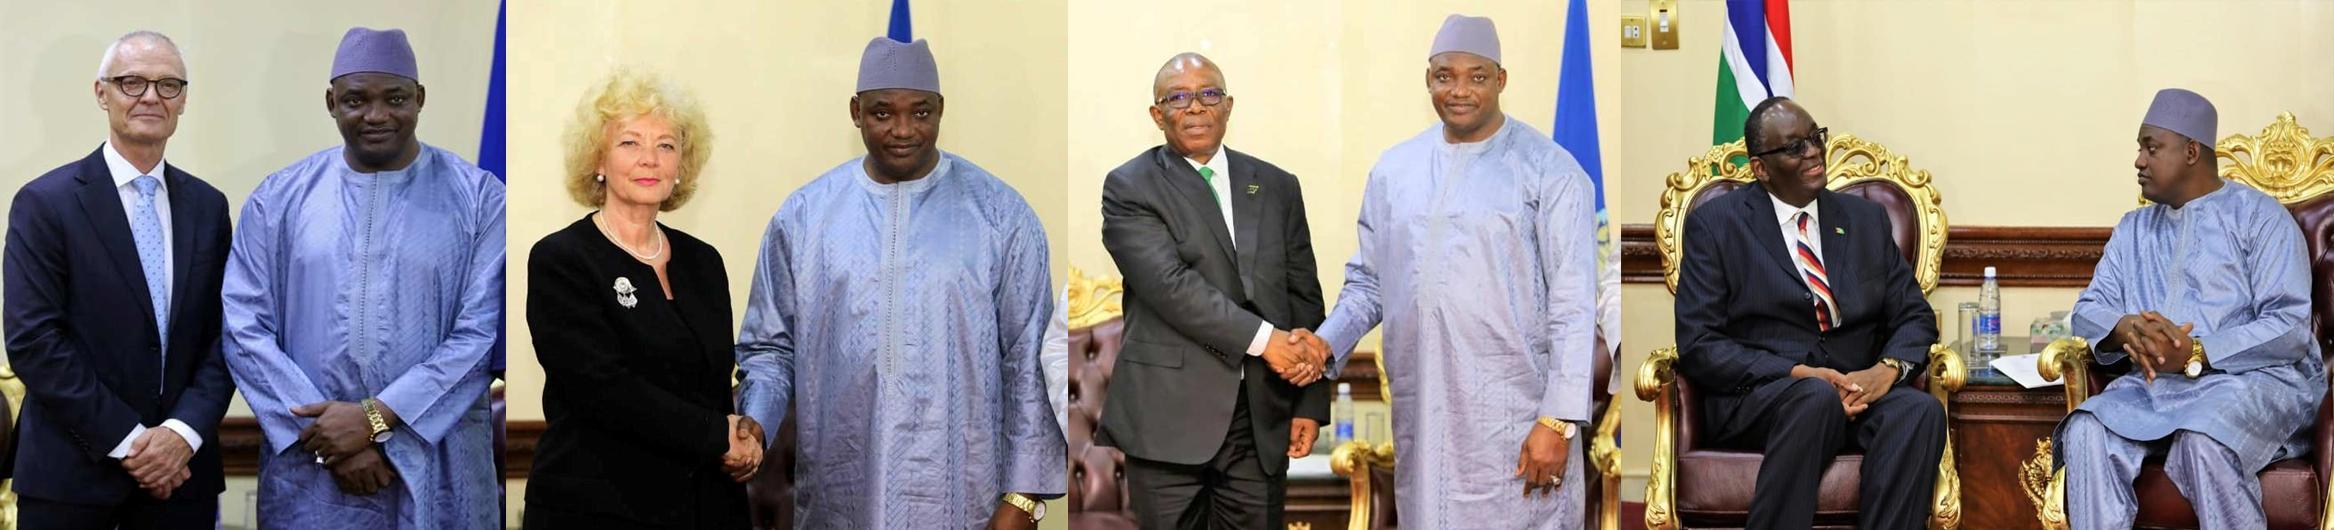 Diplomats from Norway, Sweden, Tanzania, Guyana present credentials to President Barrow